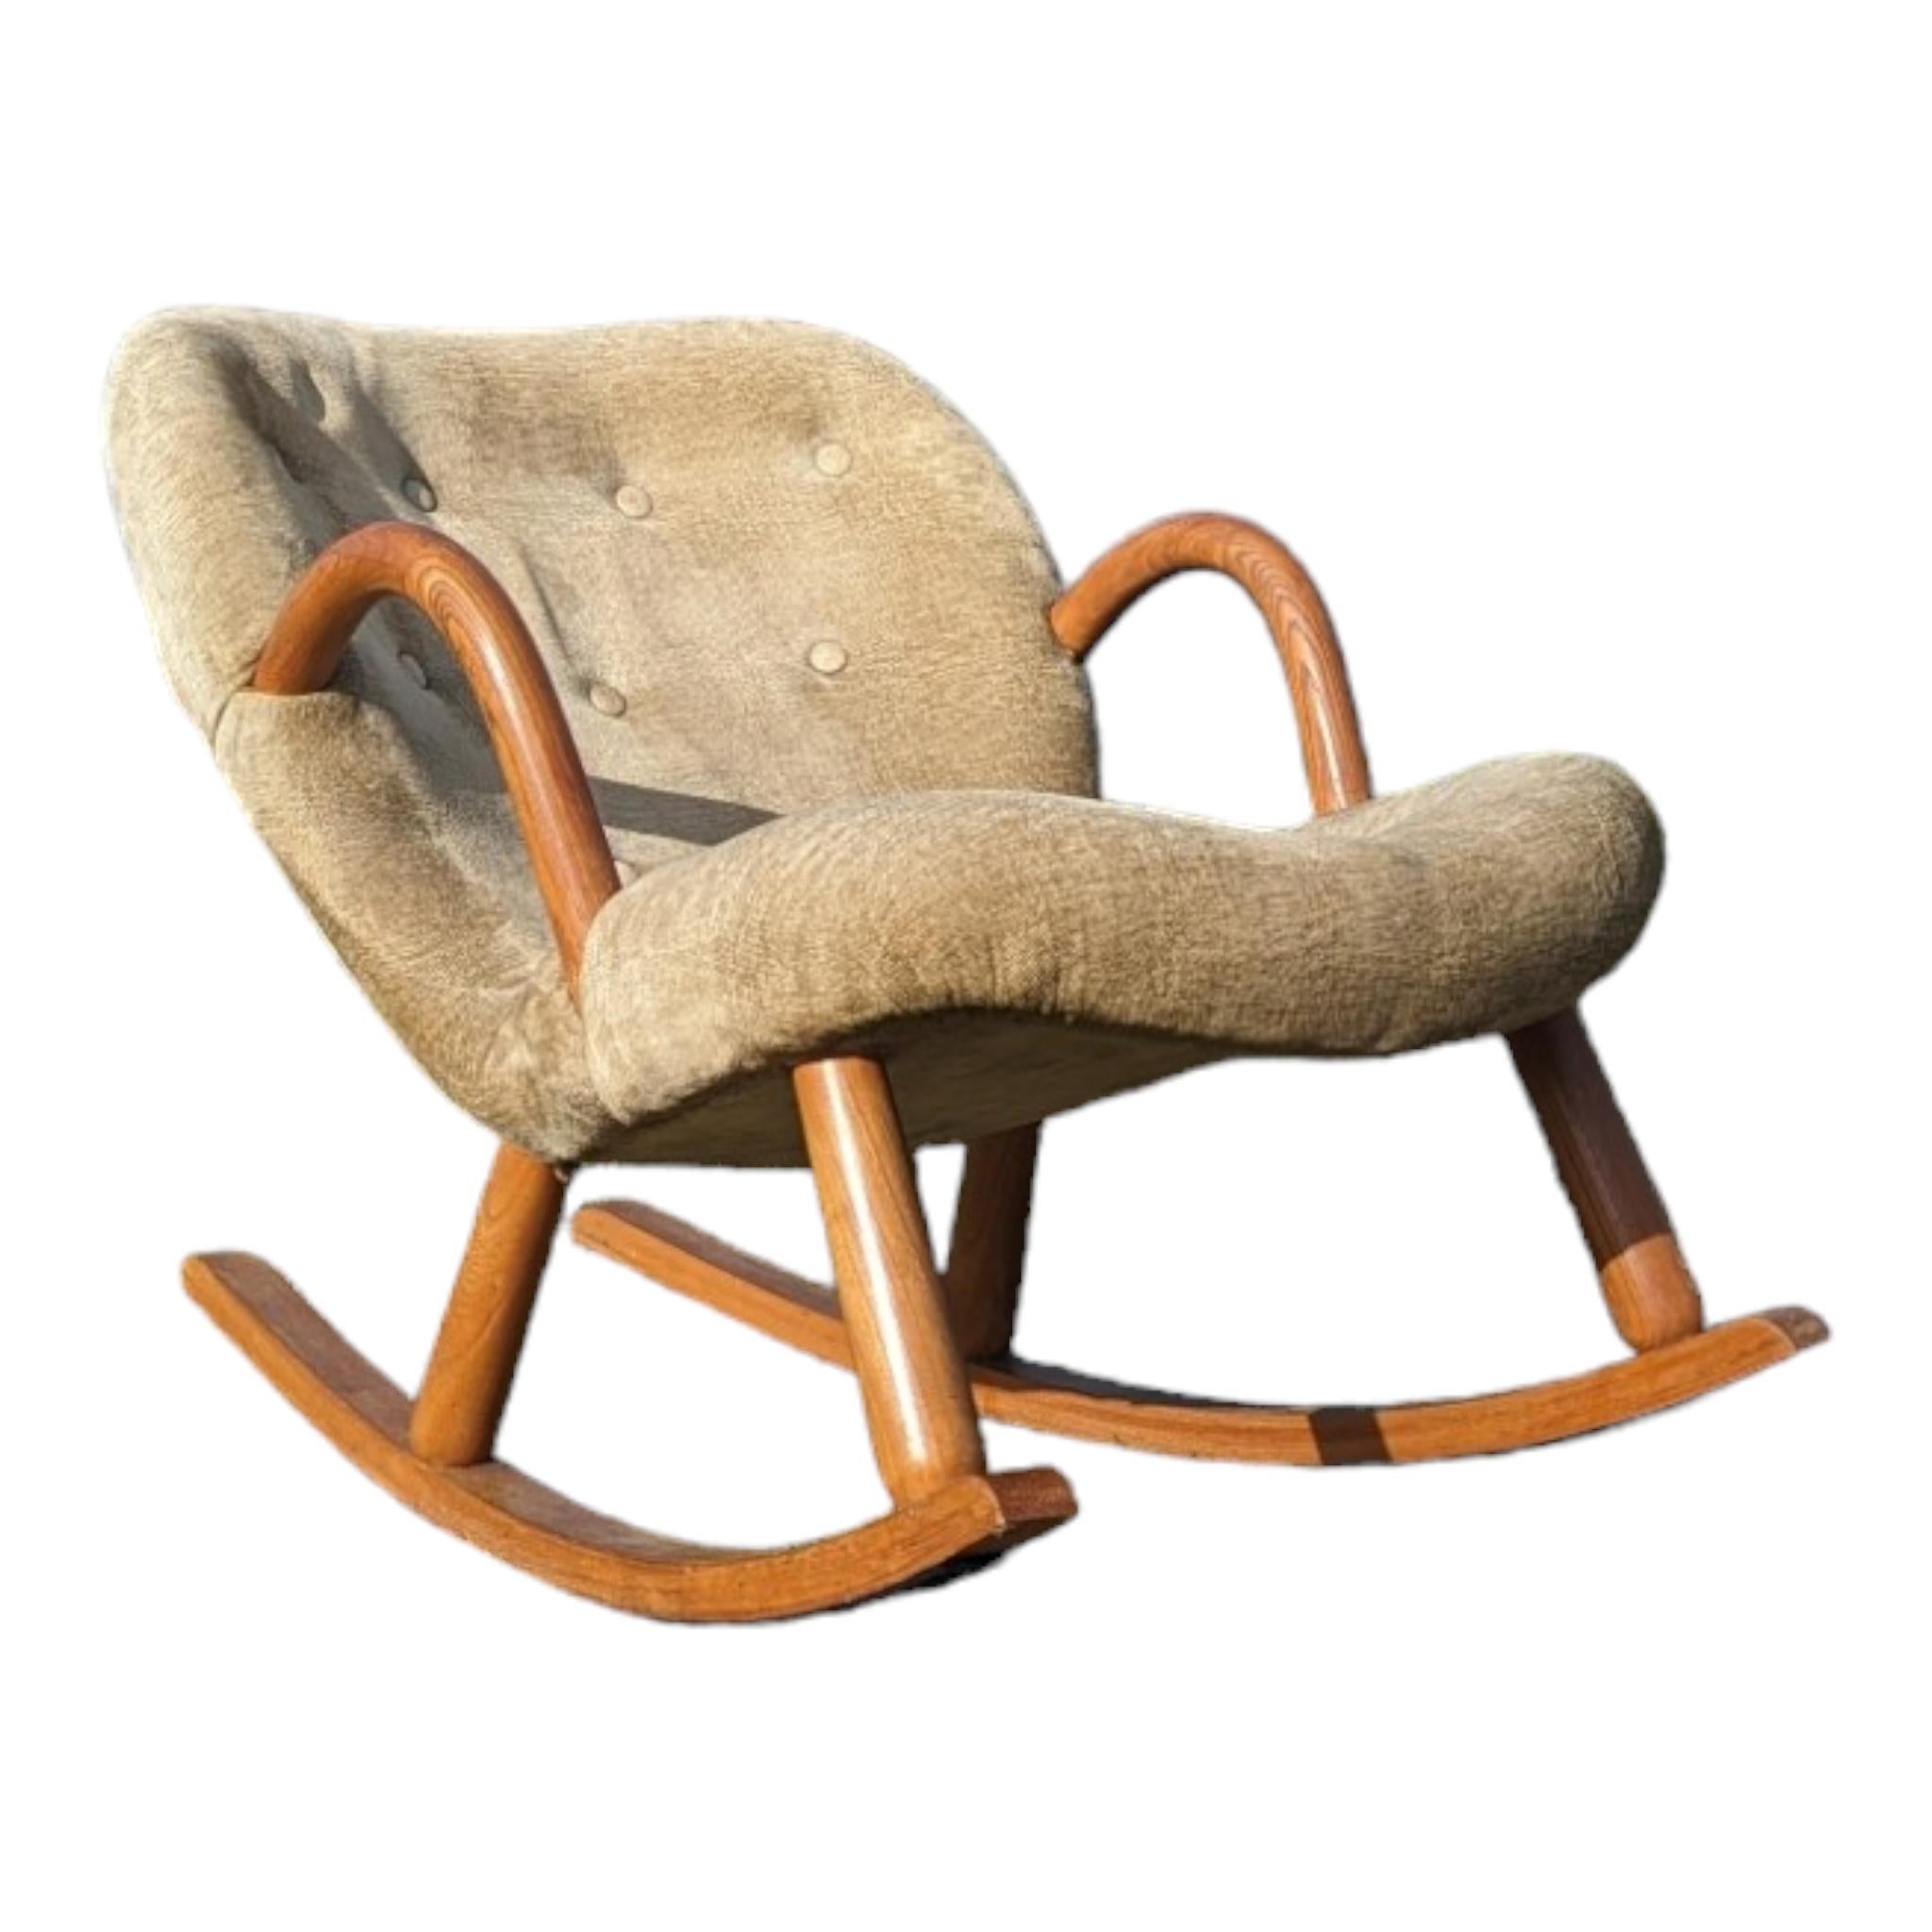 Beech Rare Arnold Madsen Attributed Clam Rocking Chair circa 1960s For Sale